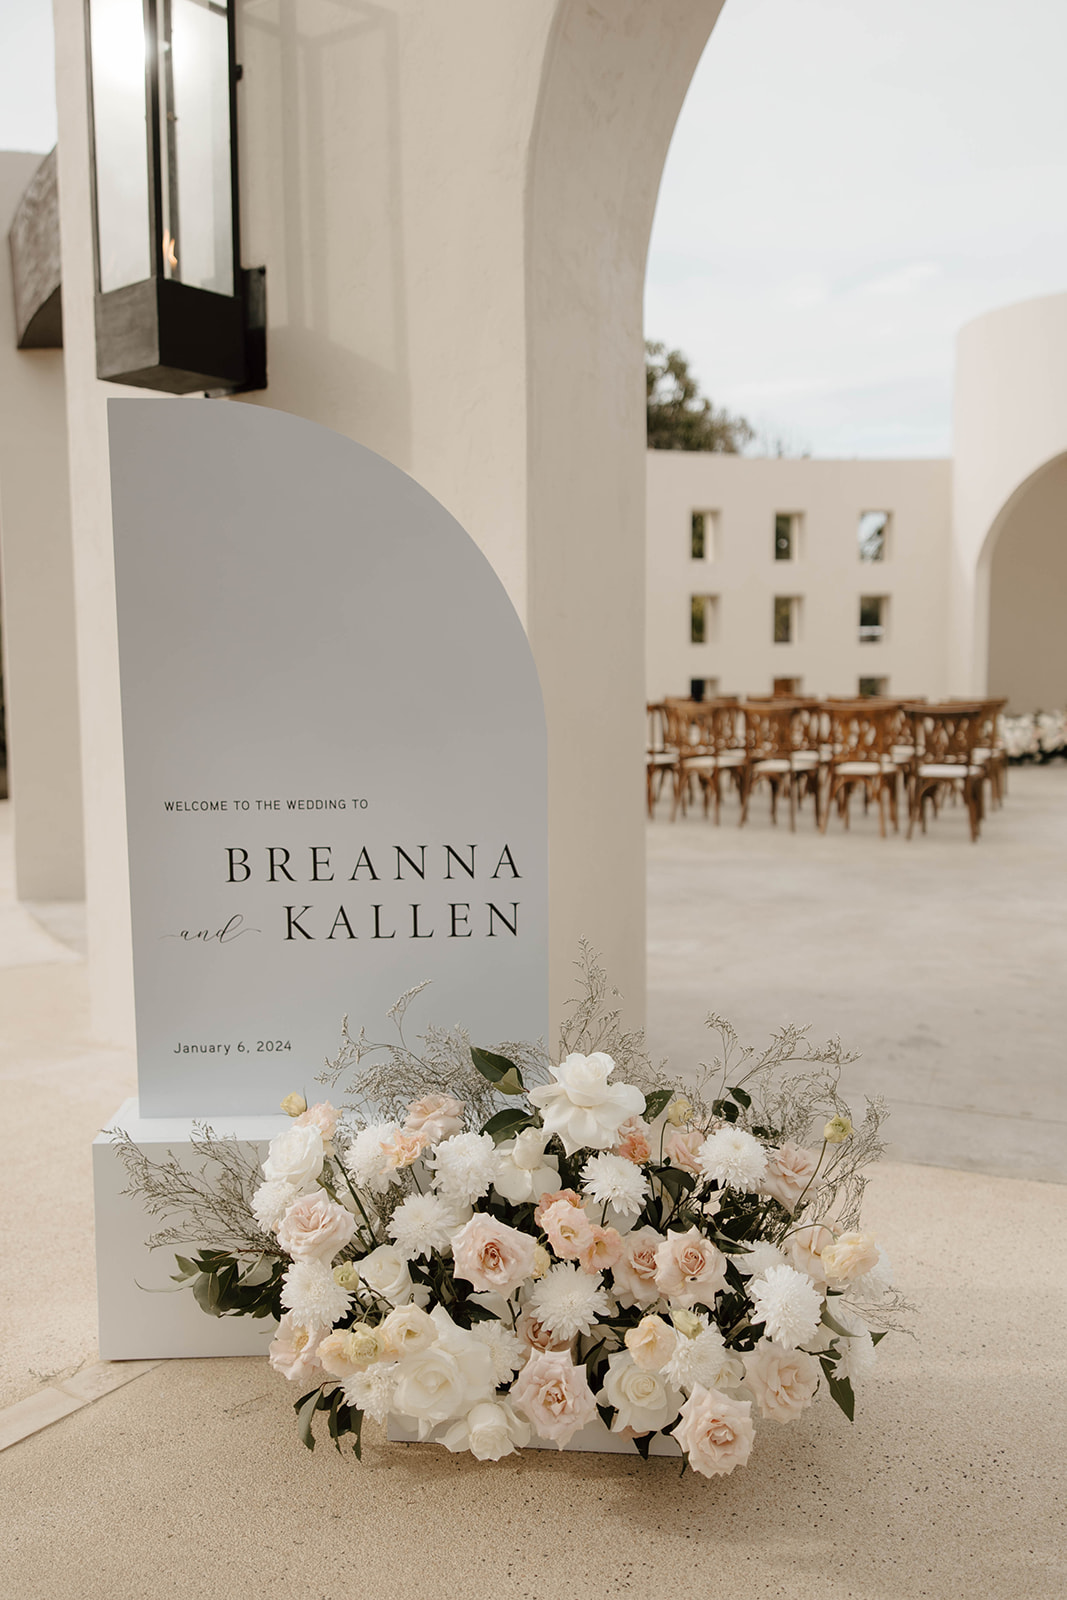 Wedding welcome sign featuring the names "breanna and kallen" with a date, placed beside a floral arrangement.